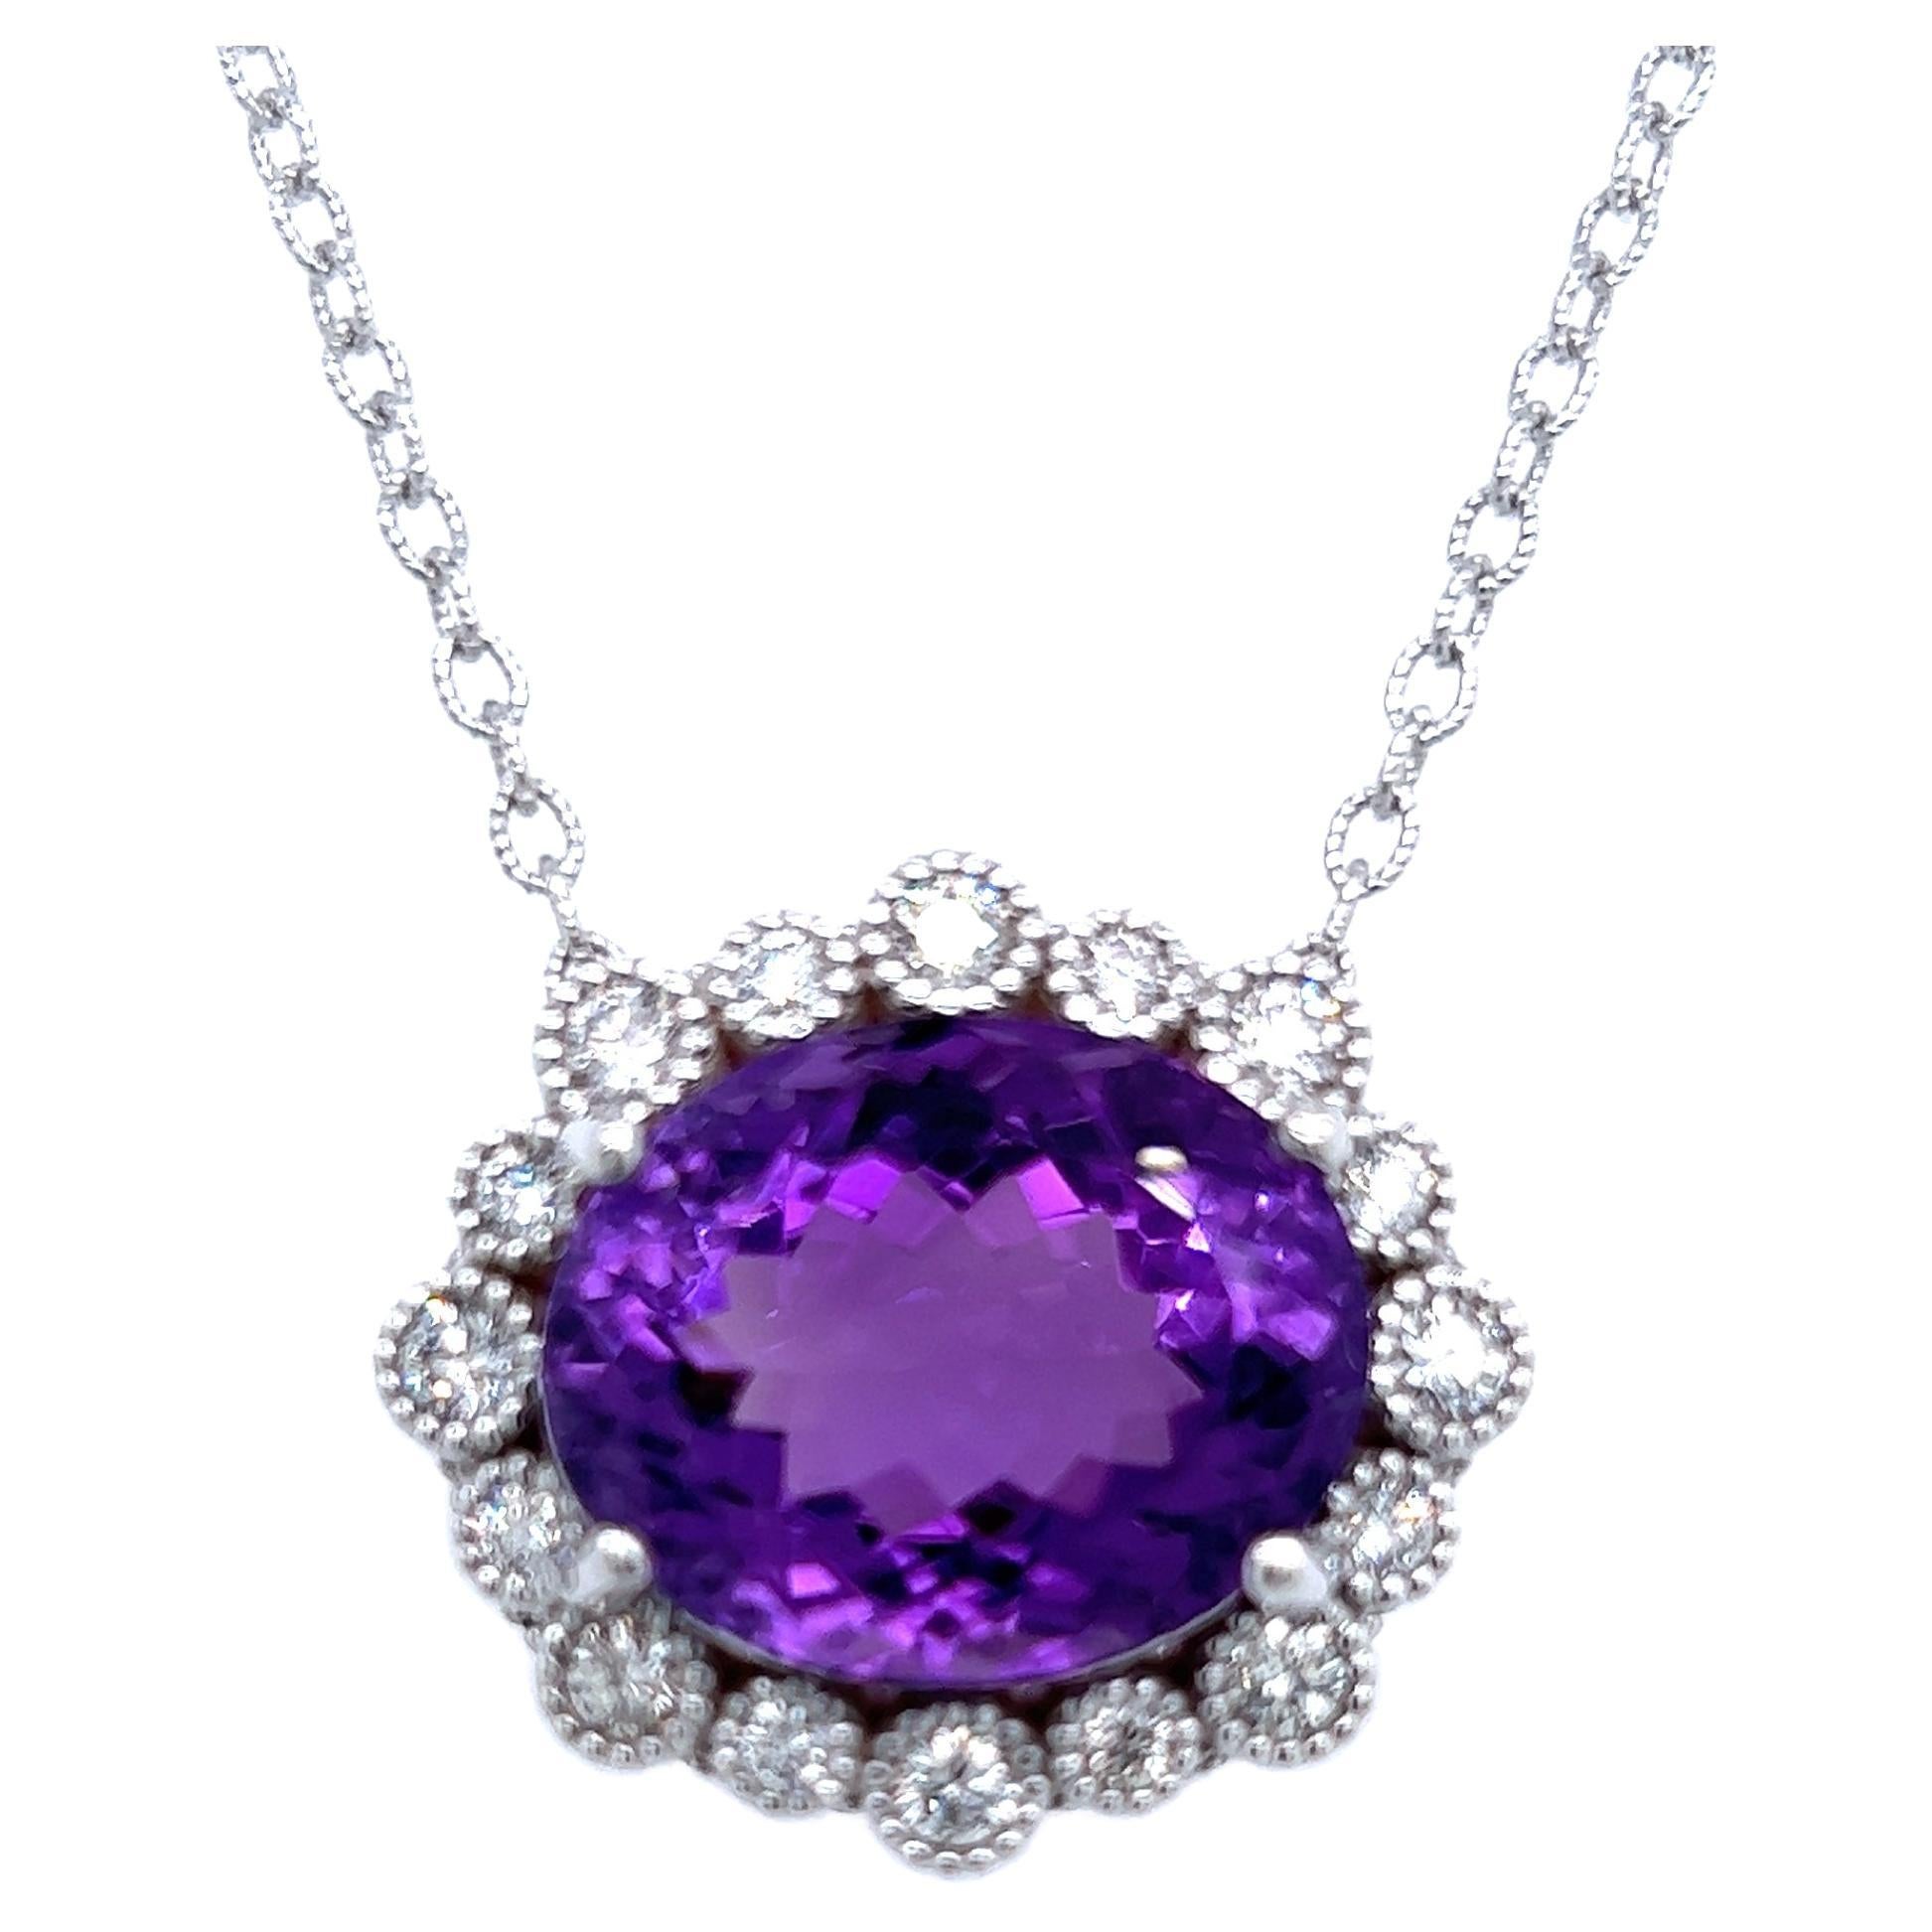 Natural Amethyst Diamond Pendant with Chain 14k W Gold 15.51 TCW Certified For Sale